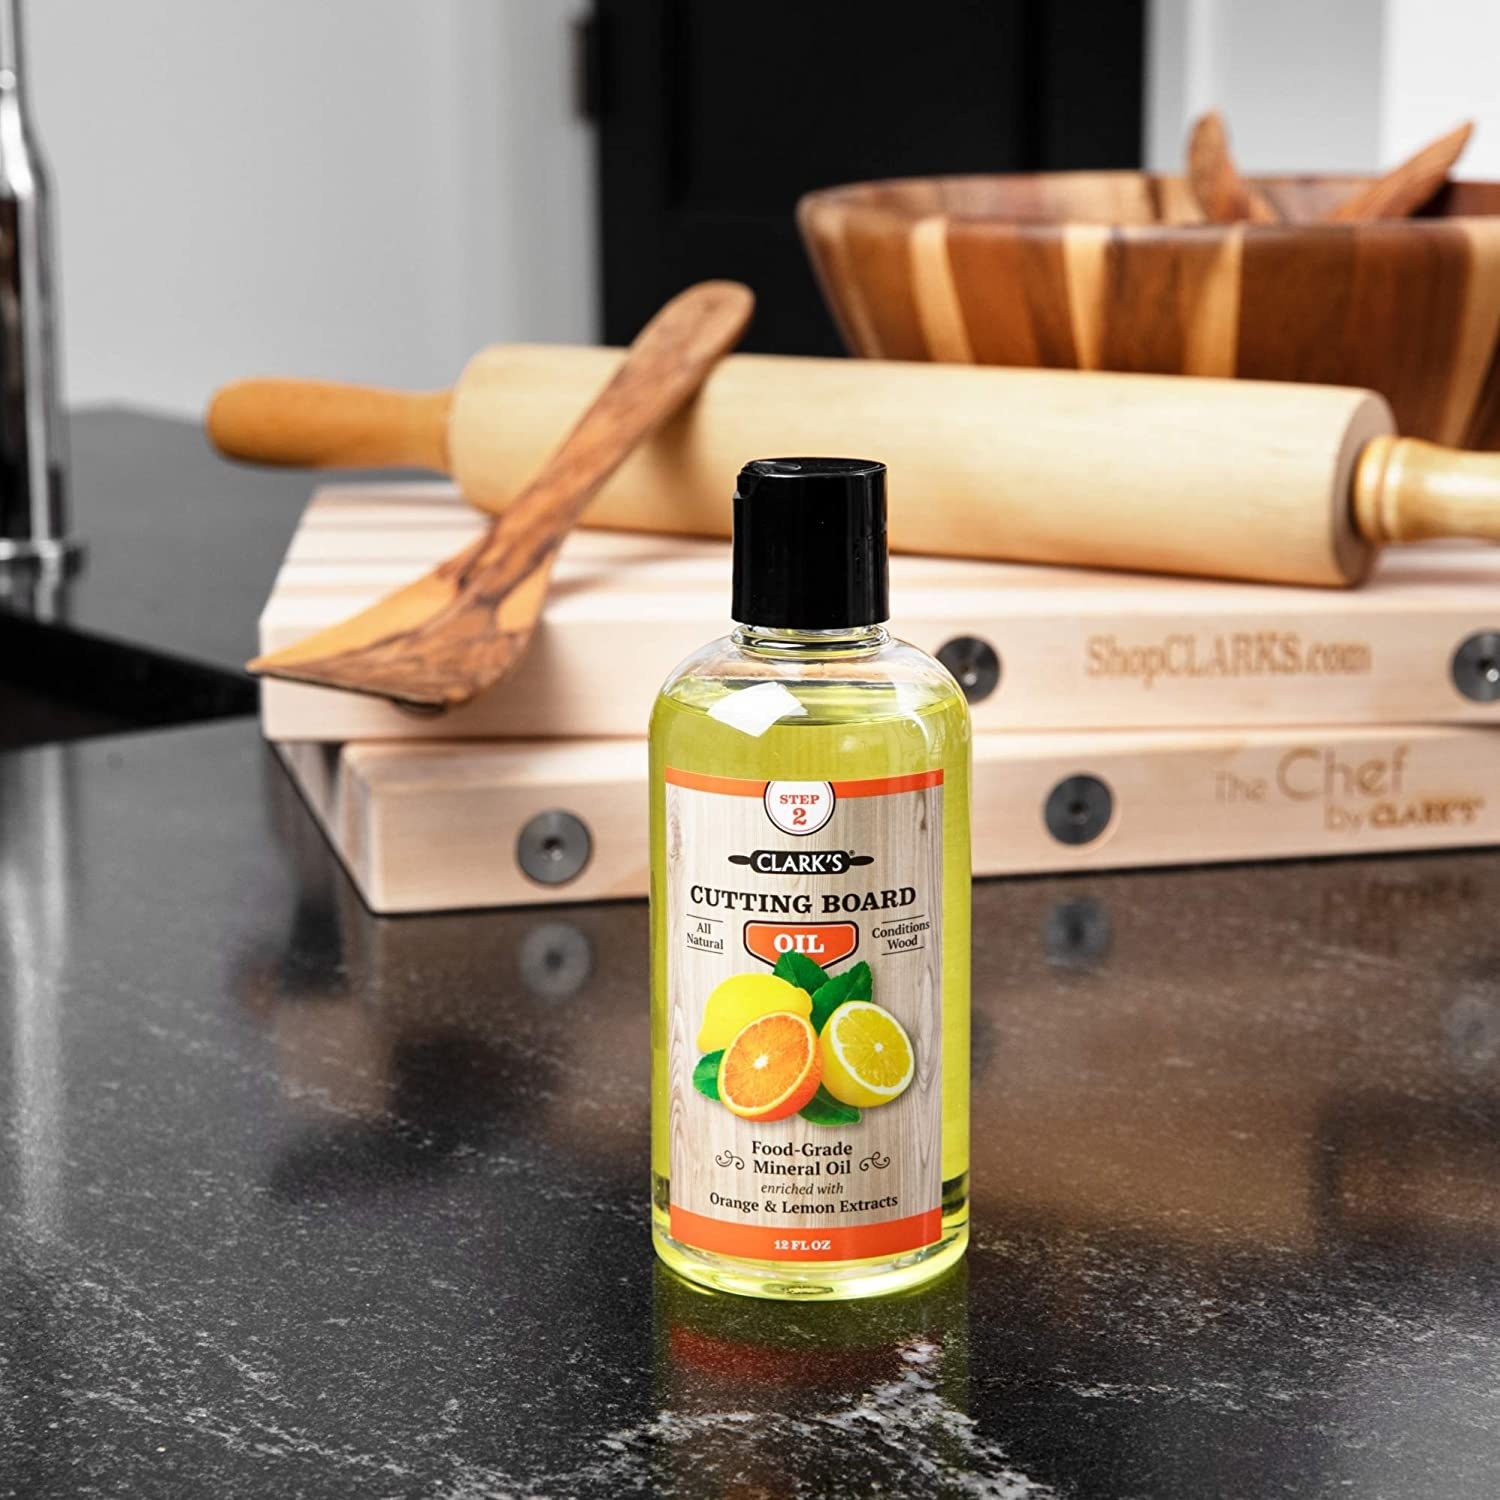 Some cutting board oil on a countertop